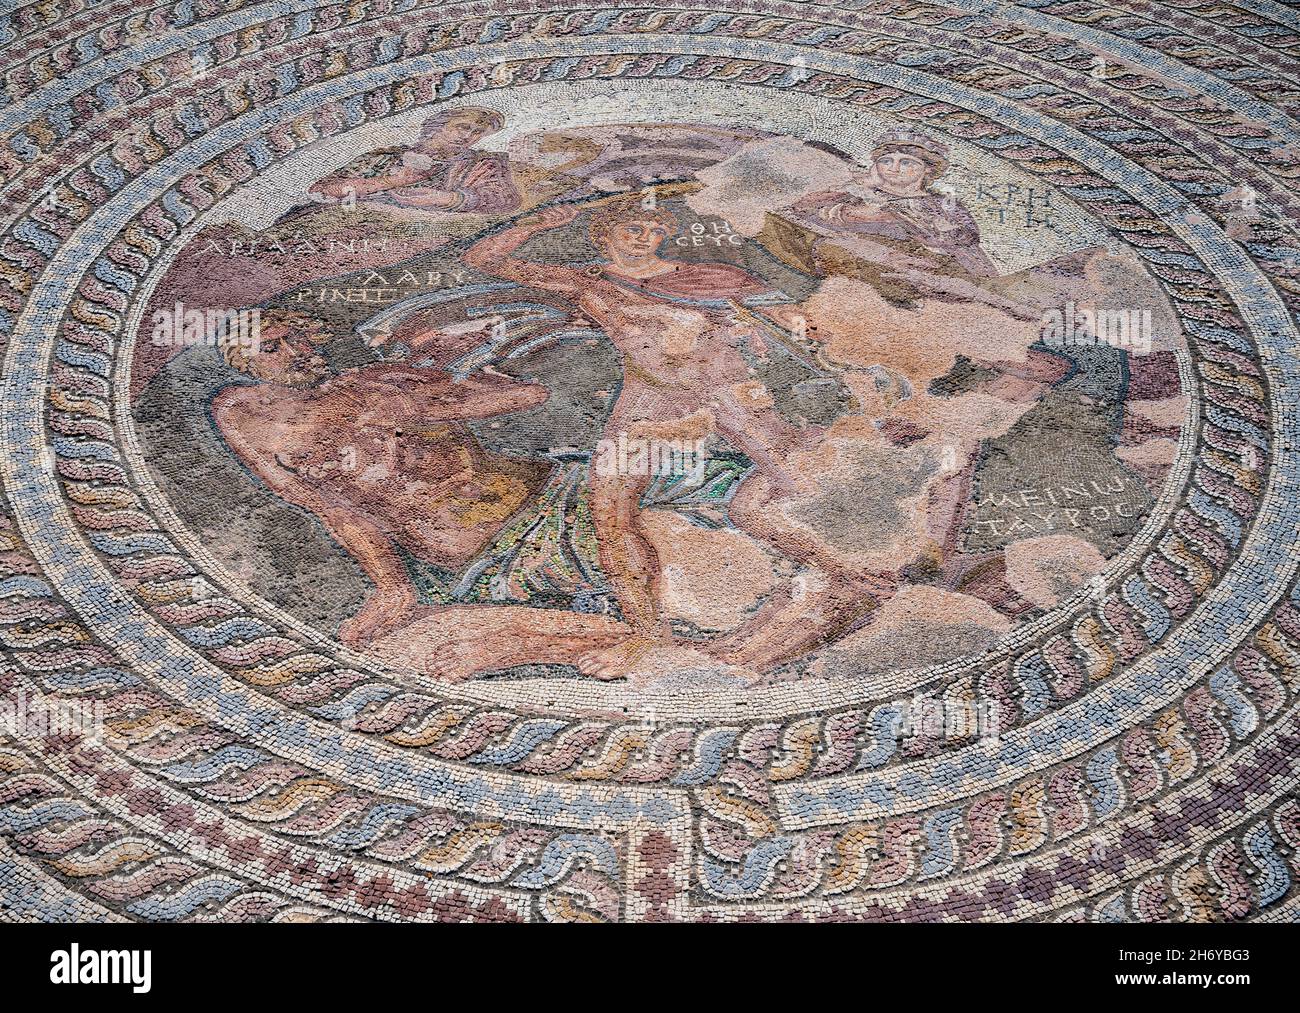 Roman mosaic depicting Thesis and the Minotaur in the House of Theseus in Nea Paphos Archeological, Cyprus Stock Photo